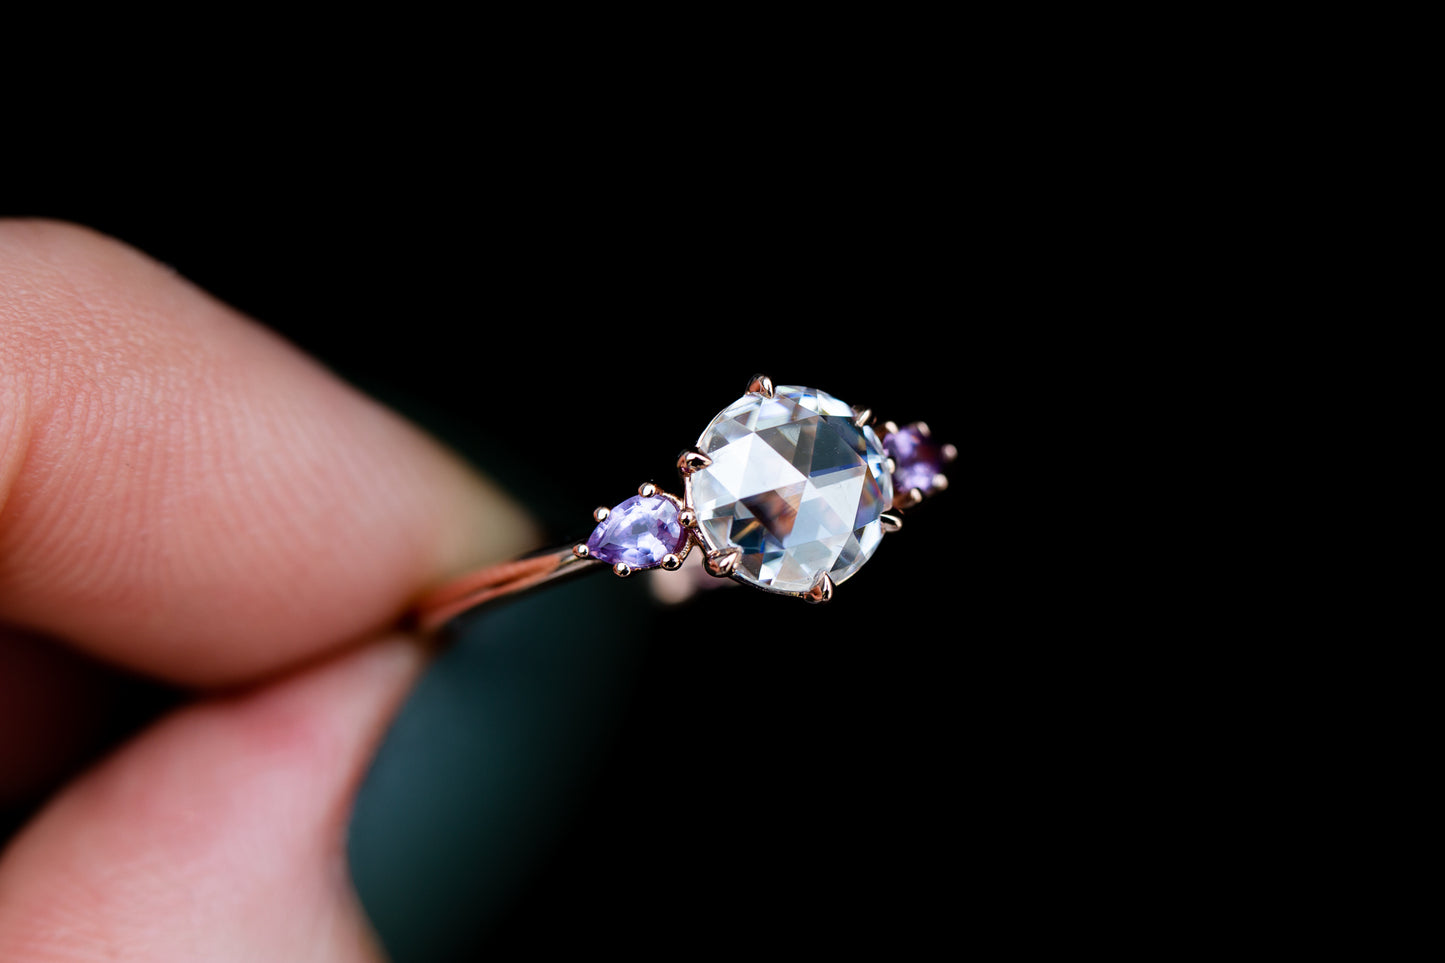 Rose cut moissanite three stone ring with purple sapphire side stones